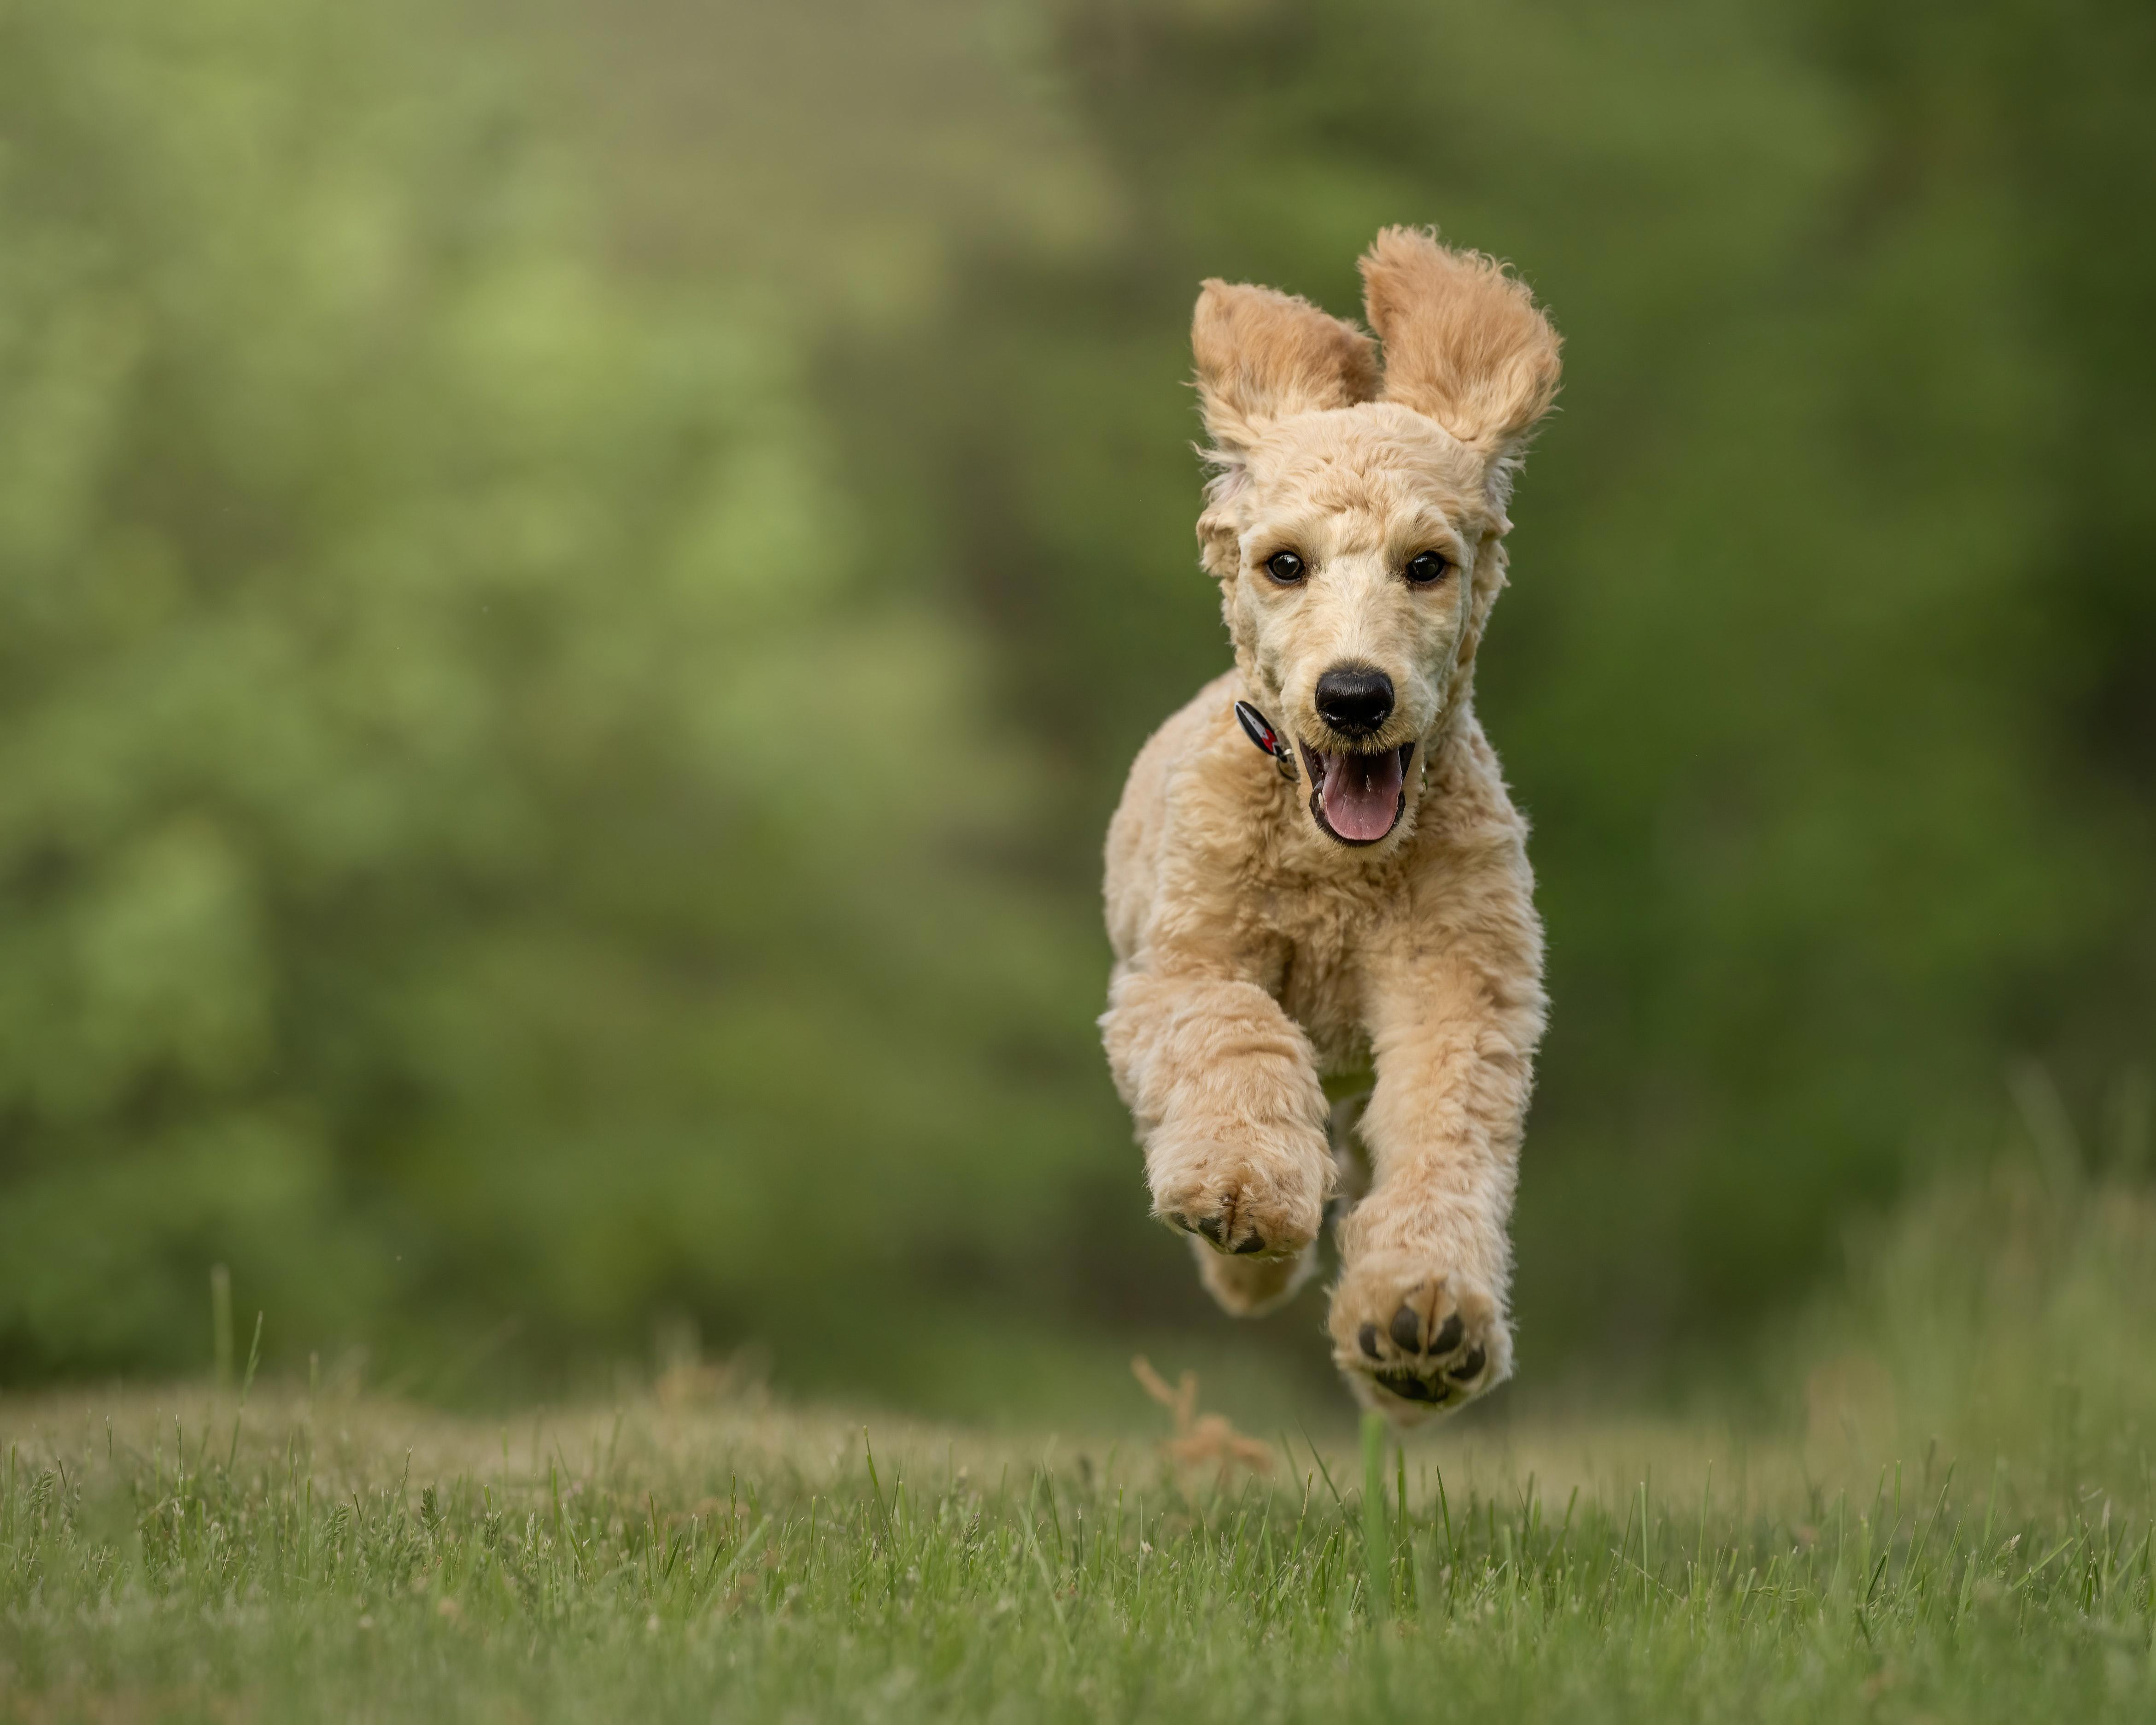 Train Your Goldendoodle Easily: Tips for Training the Intelligent and Loyal Breed